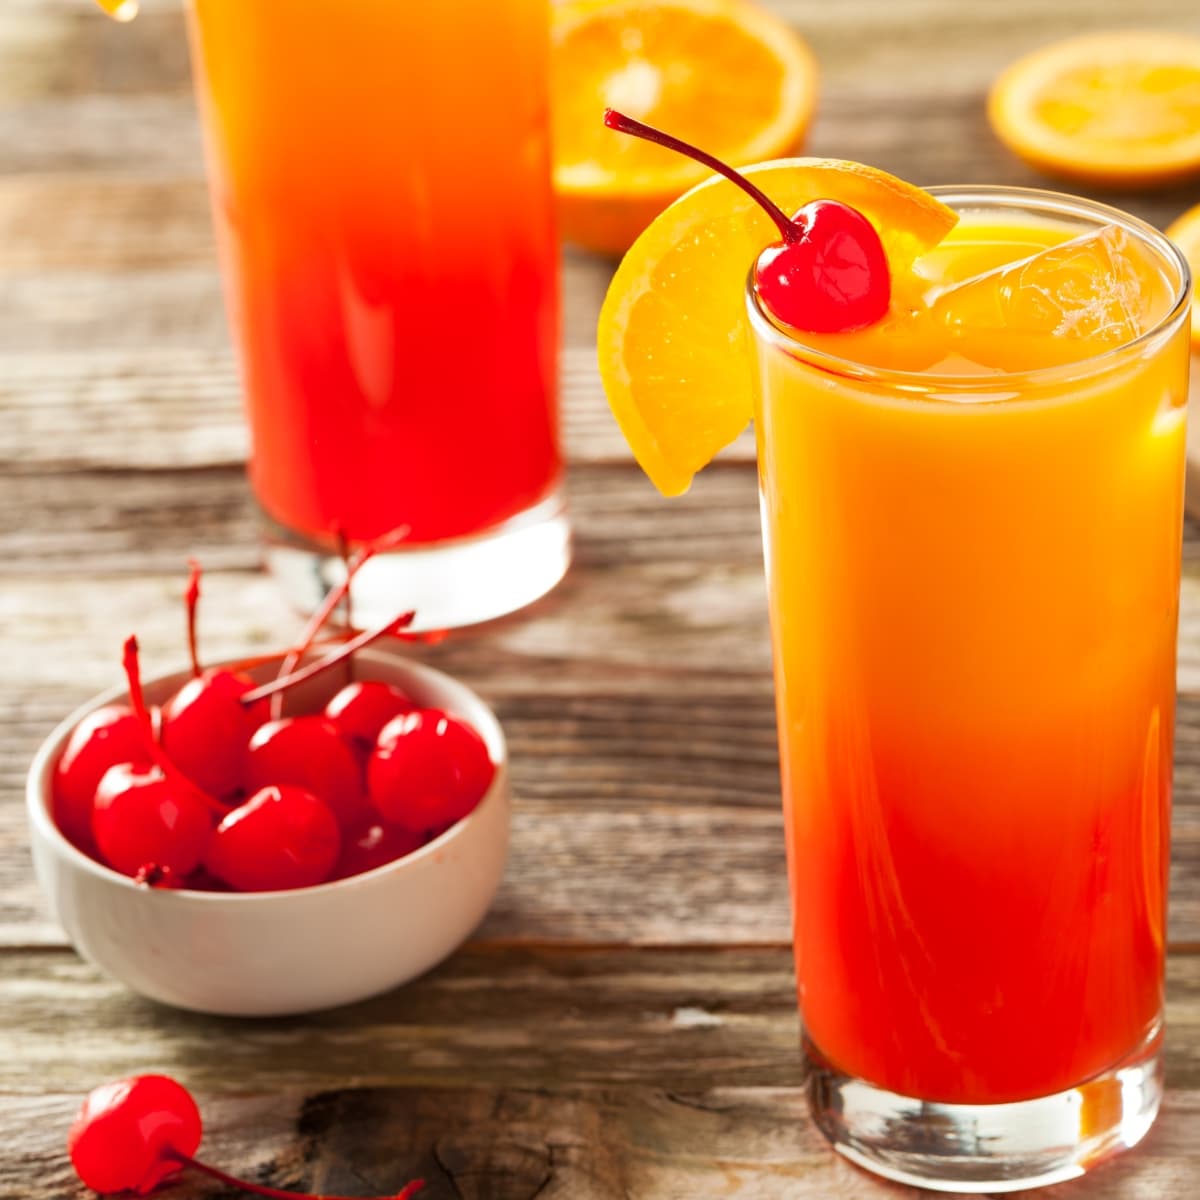 Two Tall Glasses of Refreshing Tequila Sunrise with Cherries and Orange Slices and a Bowl of Maraschino Cherries to the Side